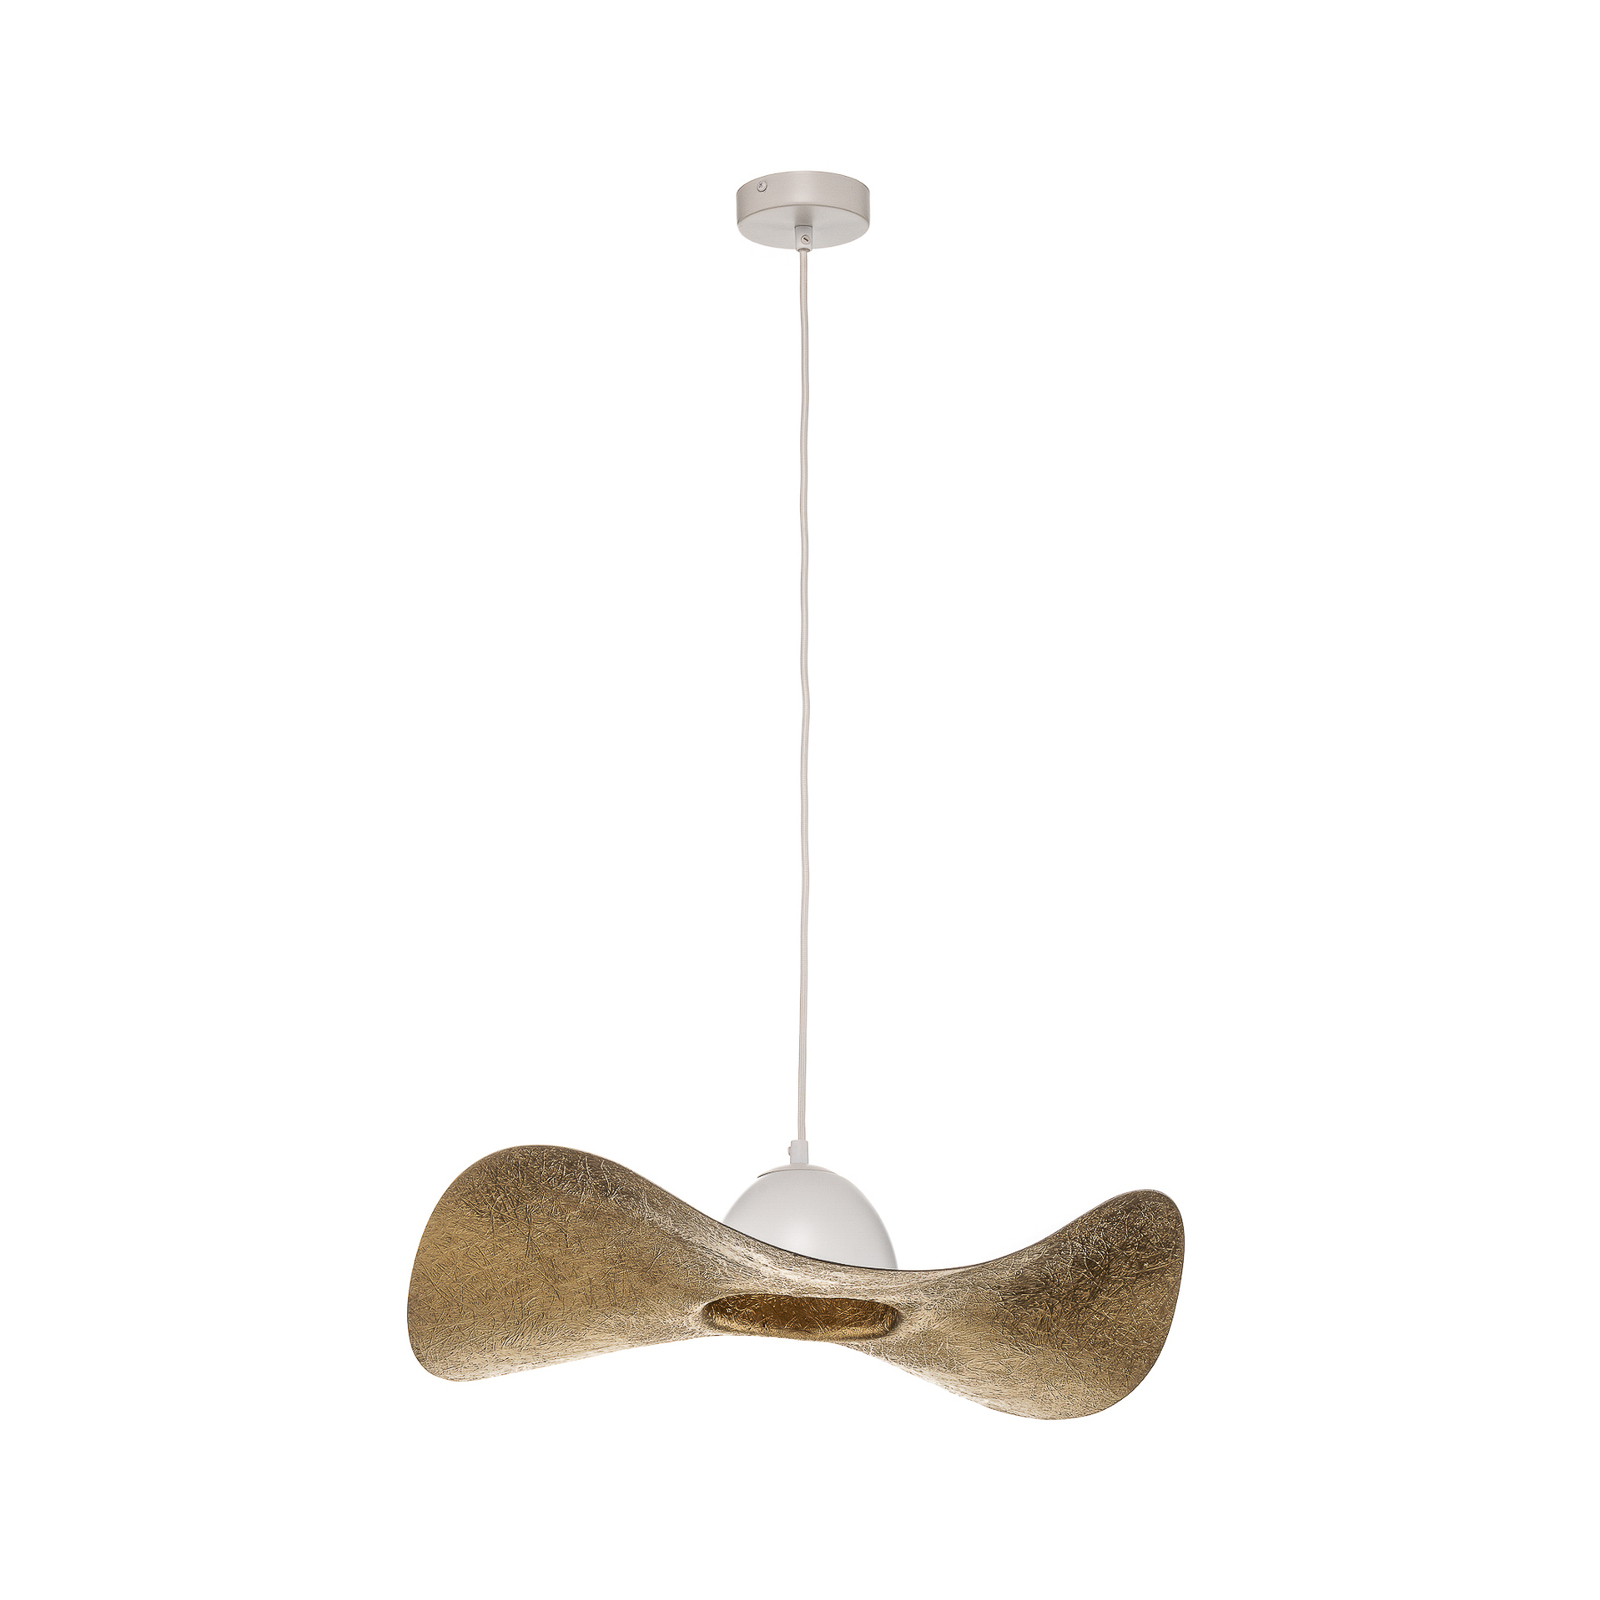 Jil pendant light, curved lampshade, white/gold